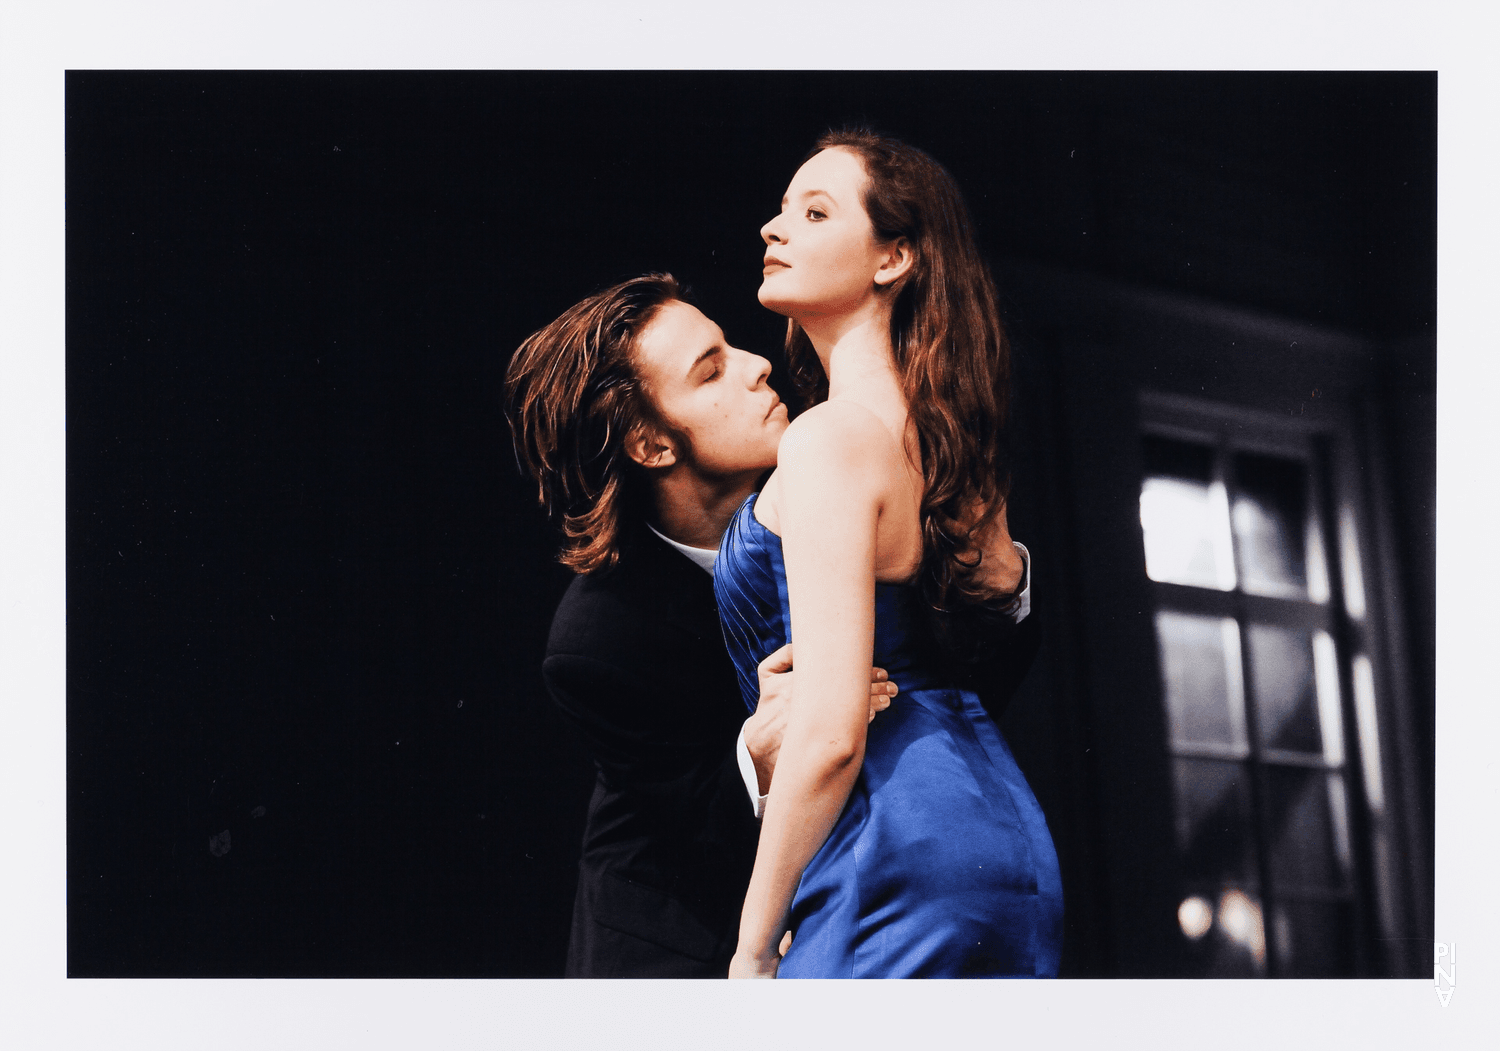 Timo Dieckmann and Kim Christin Lörken in “Kontakthof. With Teenagers over 14” by Pina Bausch